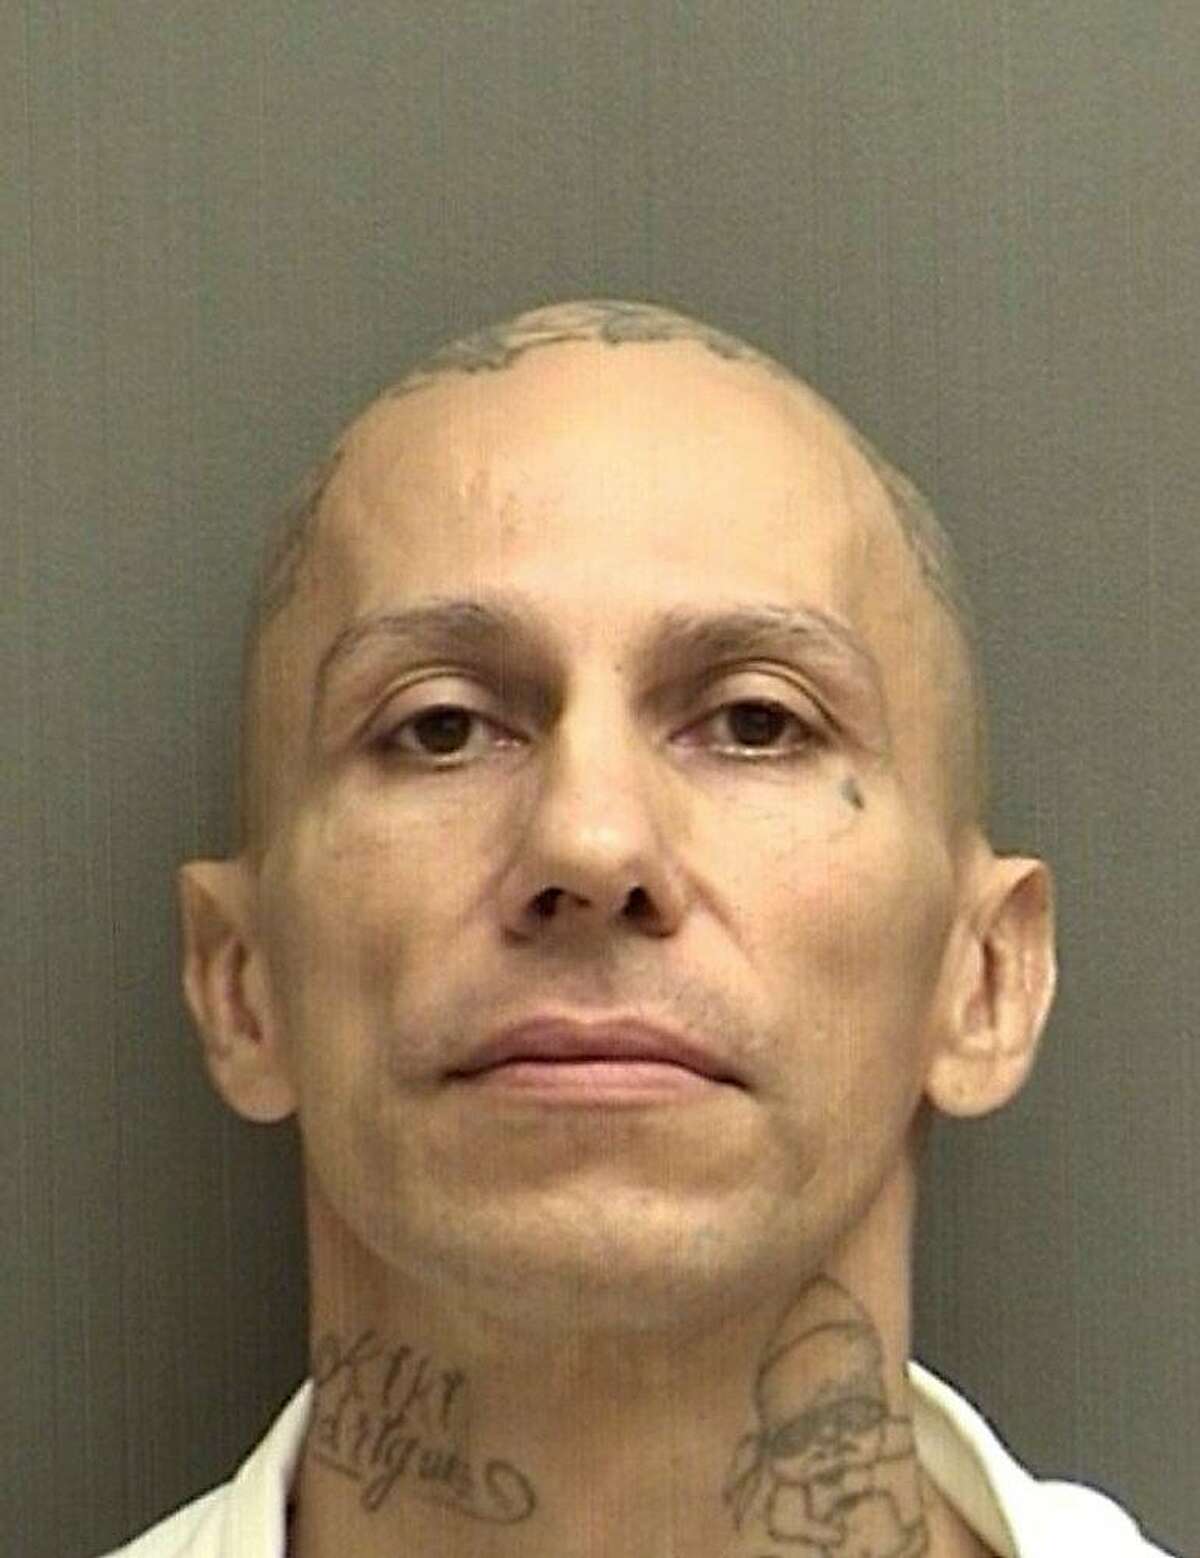 In a photo from the Houston Police Department, Jose Gilberto Rodriguez in a booking photo after his arrest. Rodriguez, 46, was arrested as the suspect in a series of attacks that included three murders, a home invasion and an assault on a city bus. 